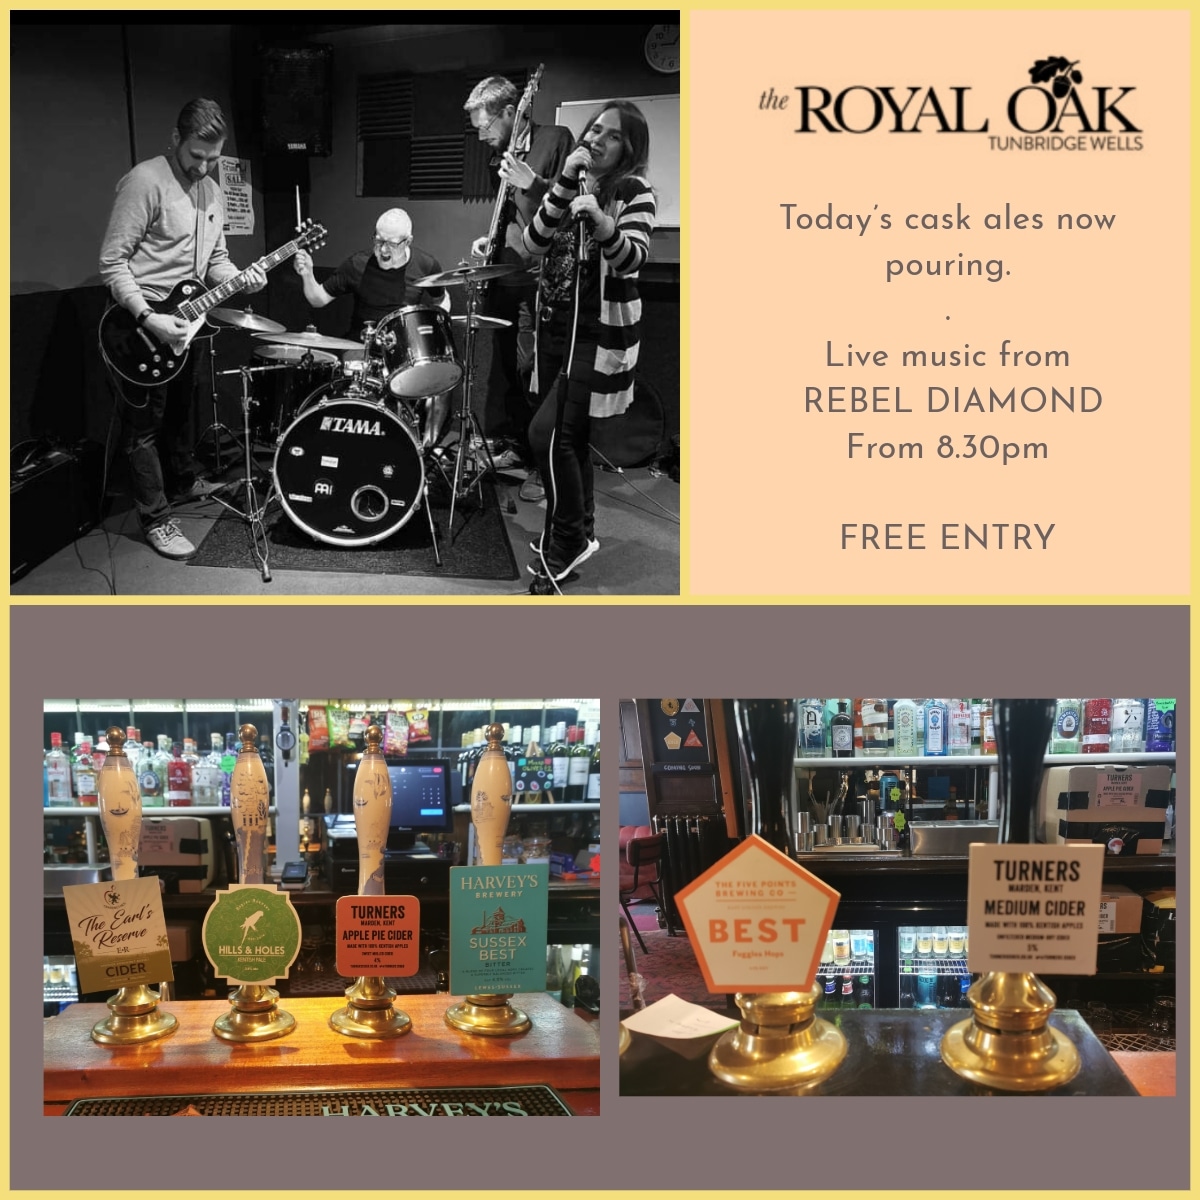 Today's cask ales now pouring and our coming.

Live music from REBEL DIAMOND from 8.30pm. FREE ENTRY

#twevents #twlivemusic #localmusic #twpubs #harveysbrewery #bexleybrewery #fivepointsbrewingco #westkentcamra #twcaskale #twrealale #realalefinder